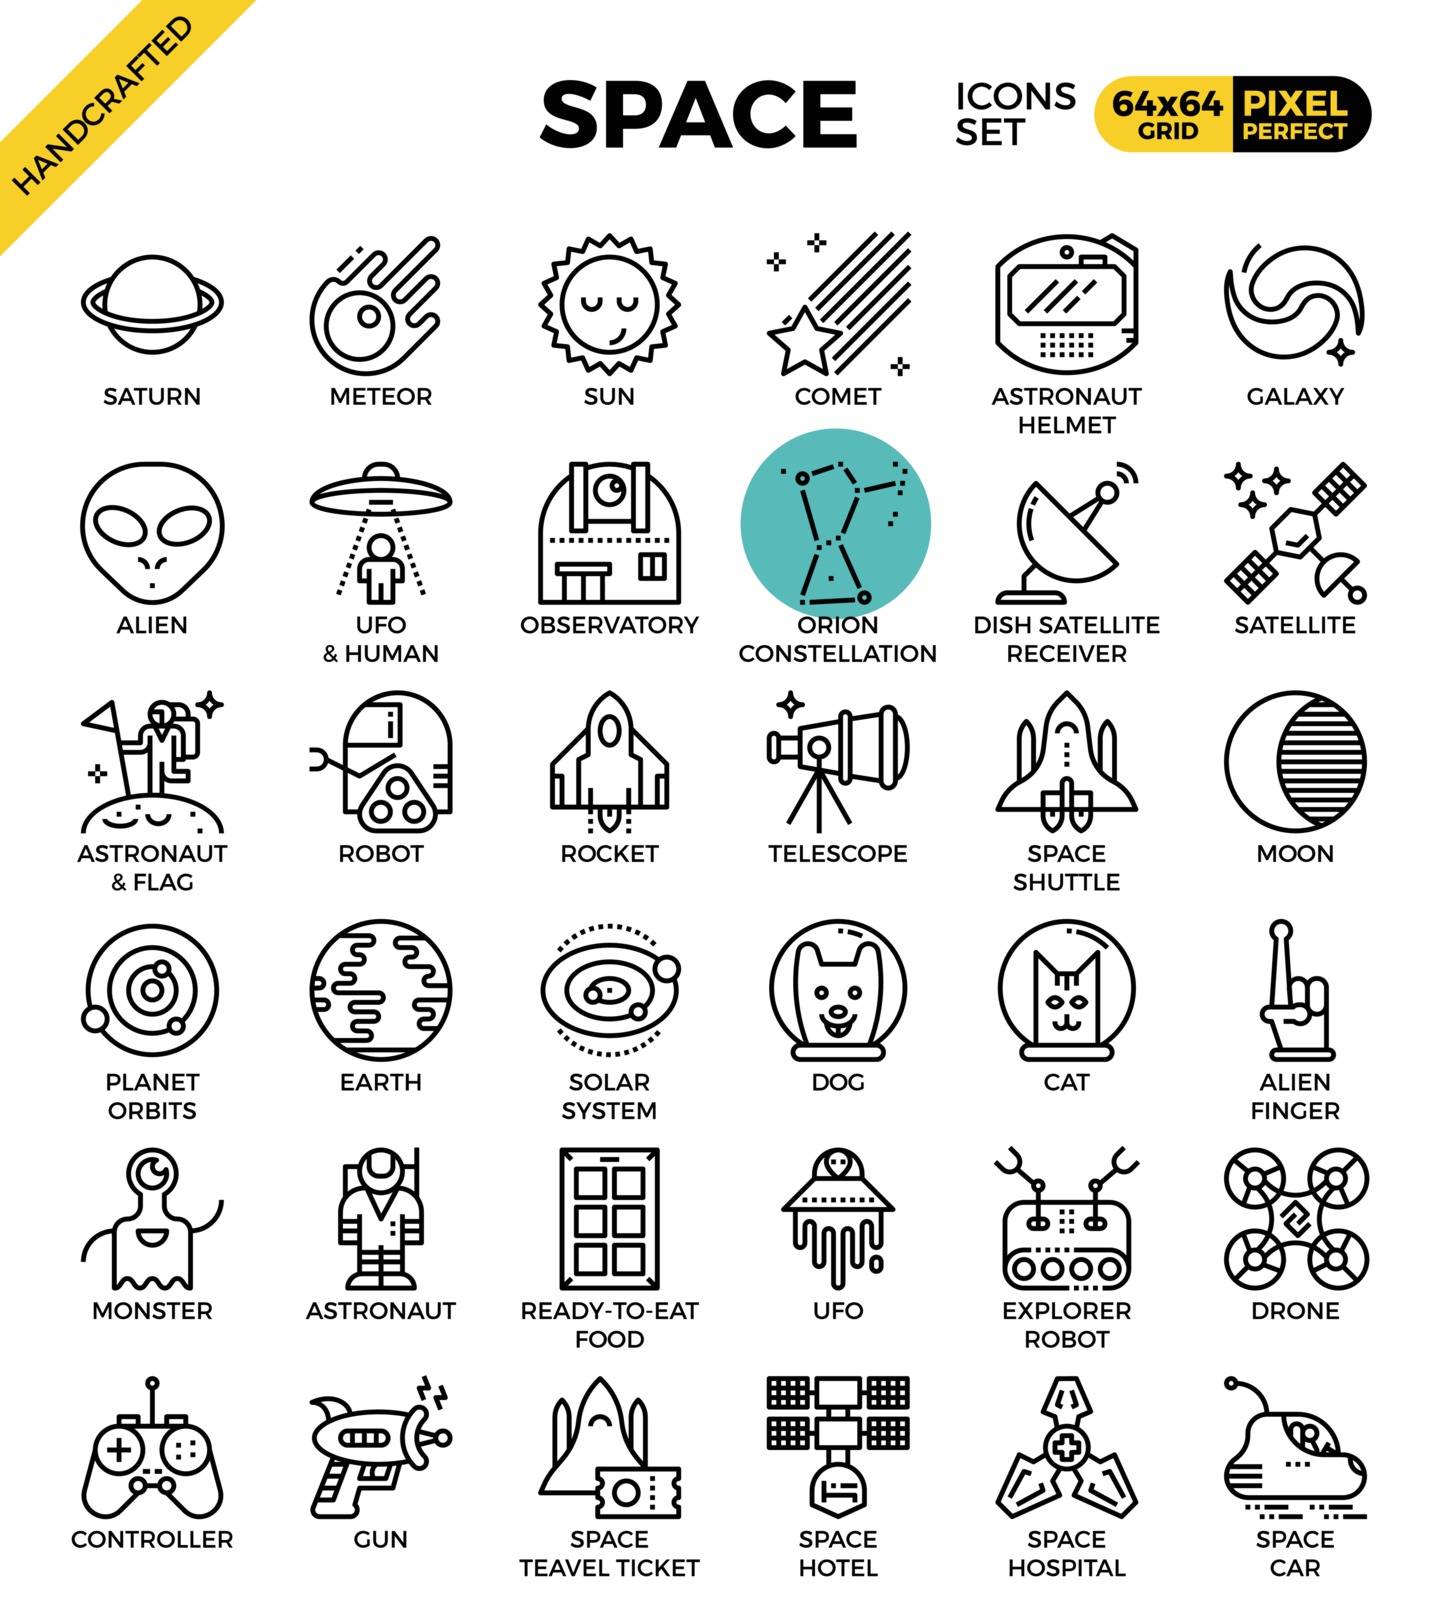 Space and galaxy icons by nongpimmy